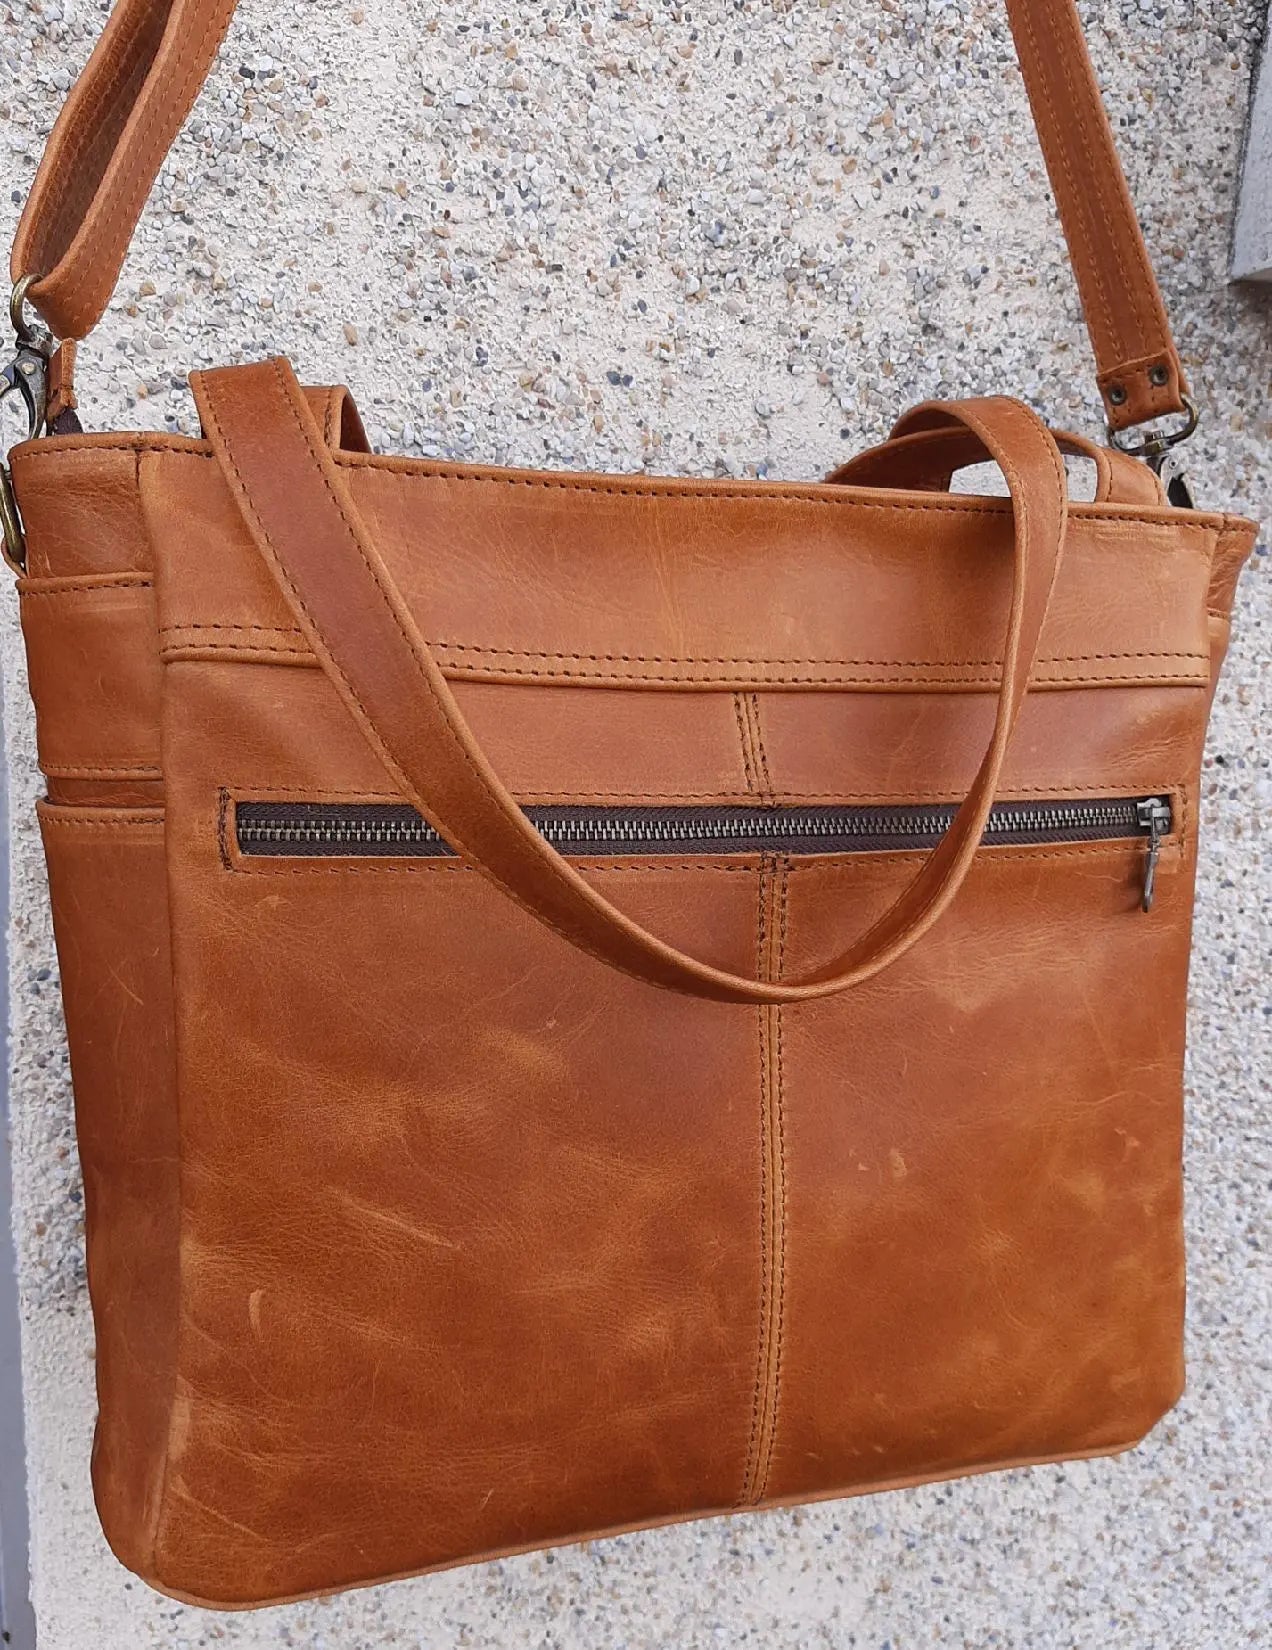 Marie Nel leather bags  toffee tan colour made by Cape Masai Leather